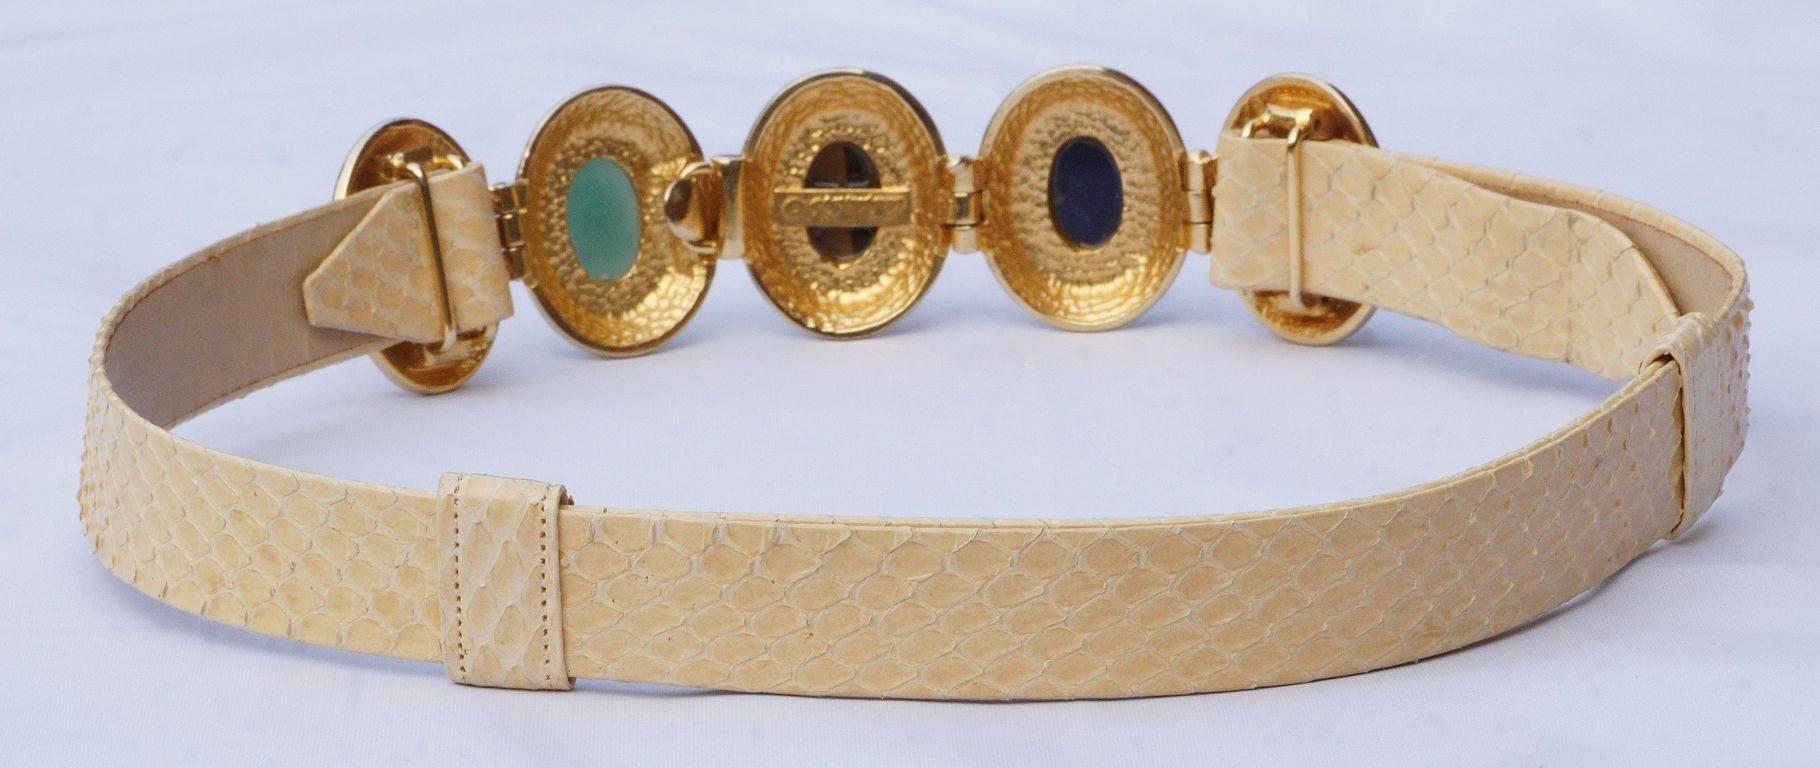 Alexis Kirk adjustable cream snakeskin belt, featuring oval semi-precious stones set in a gold tone and enamel surround.

This luxurious designer belt is very good condition.